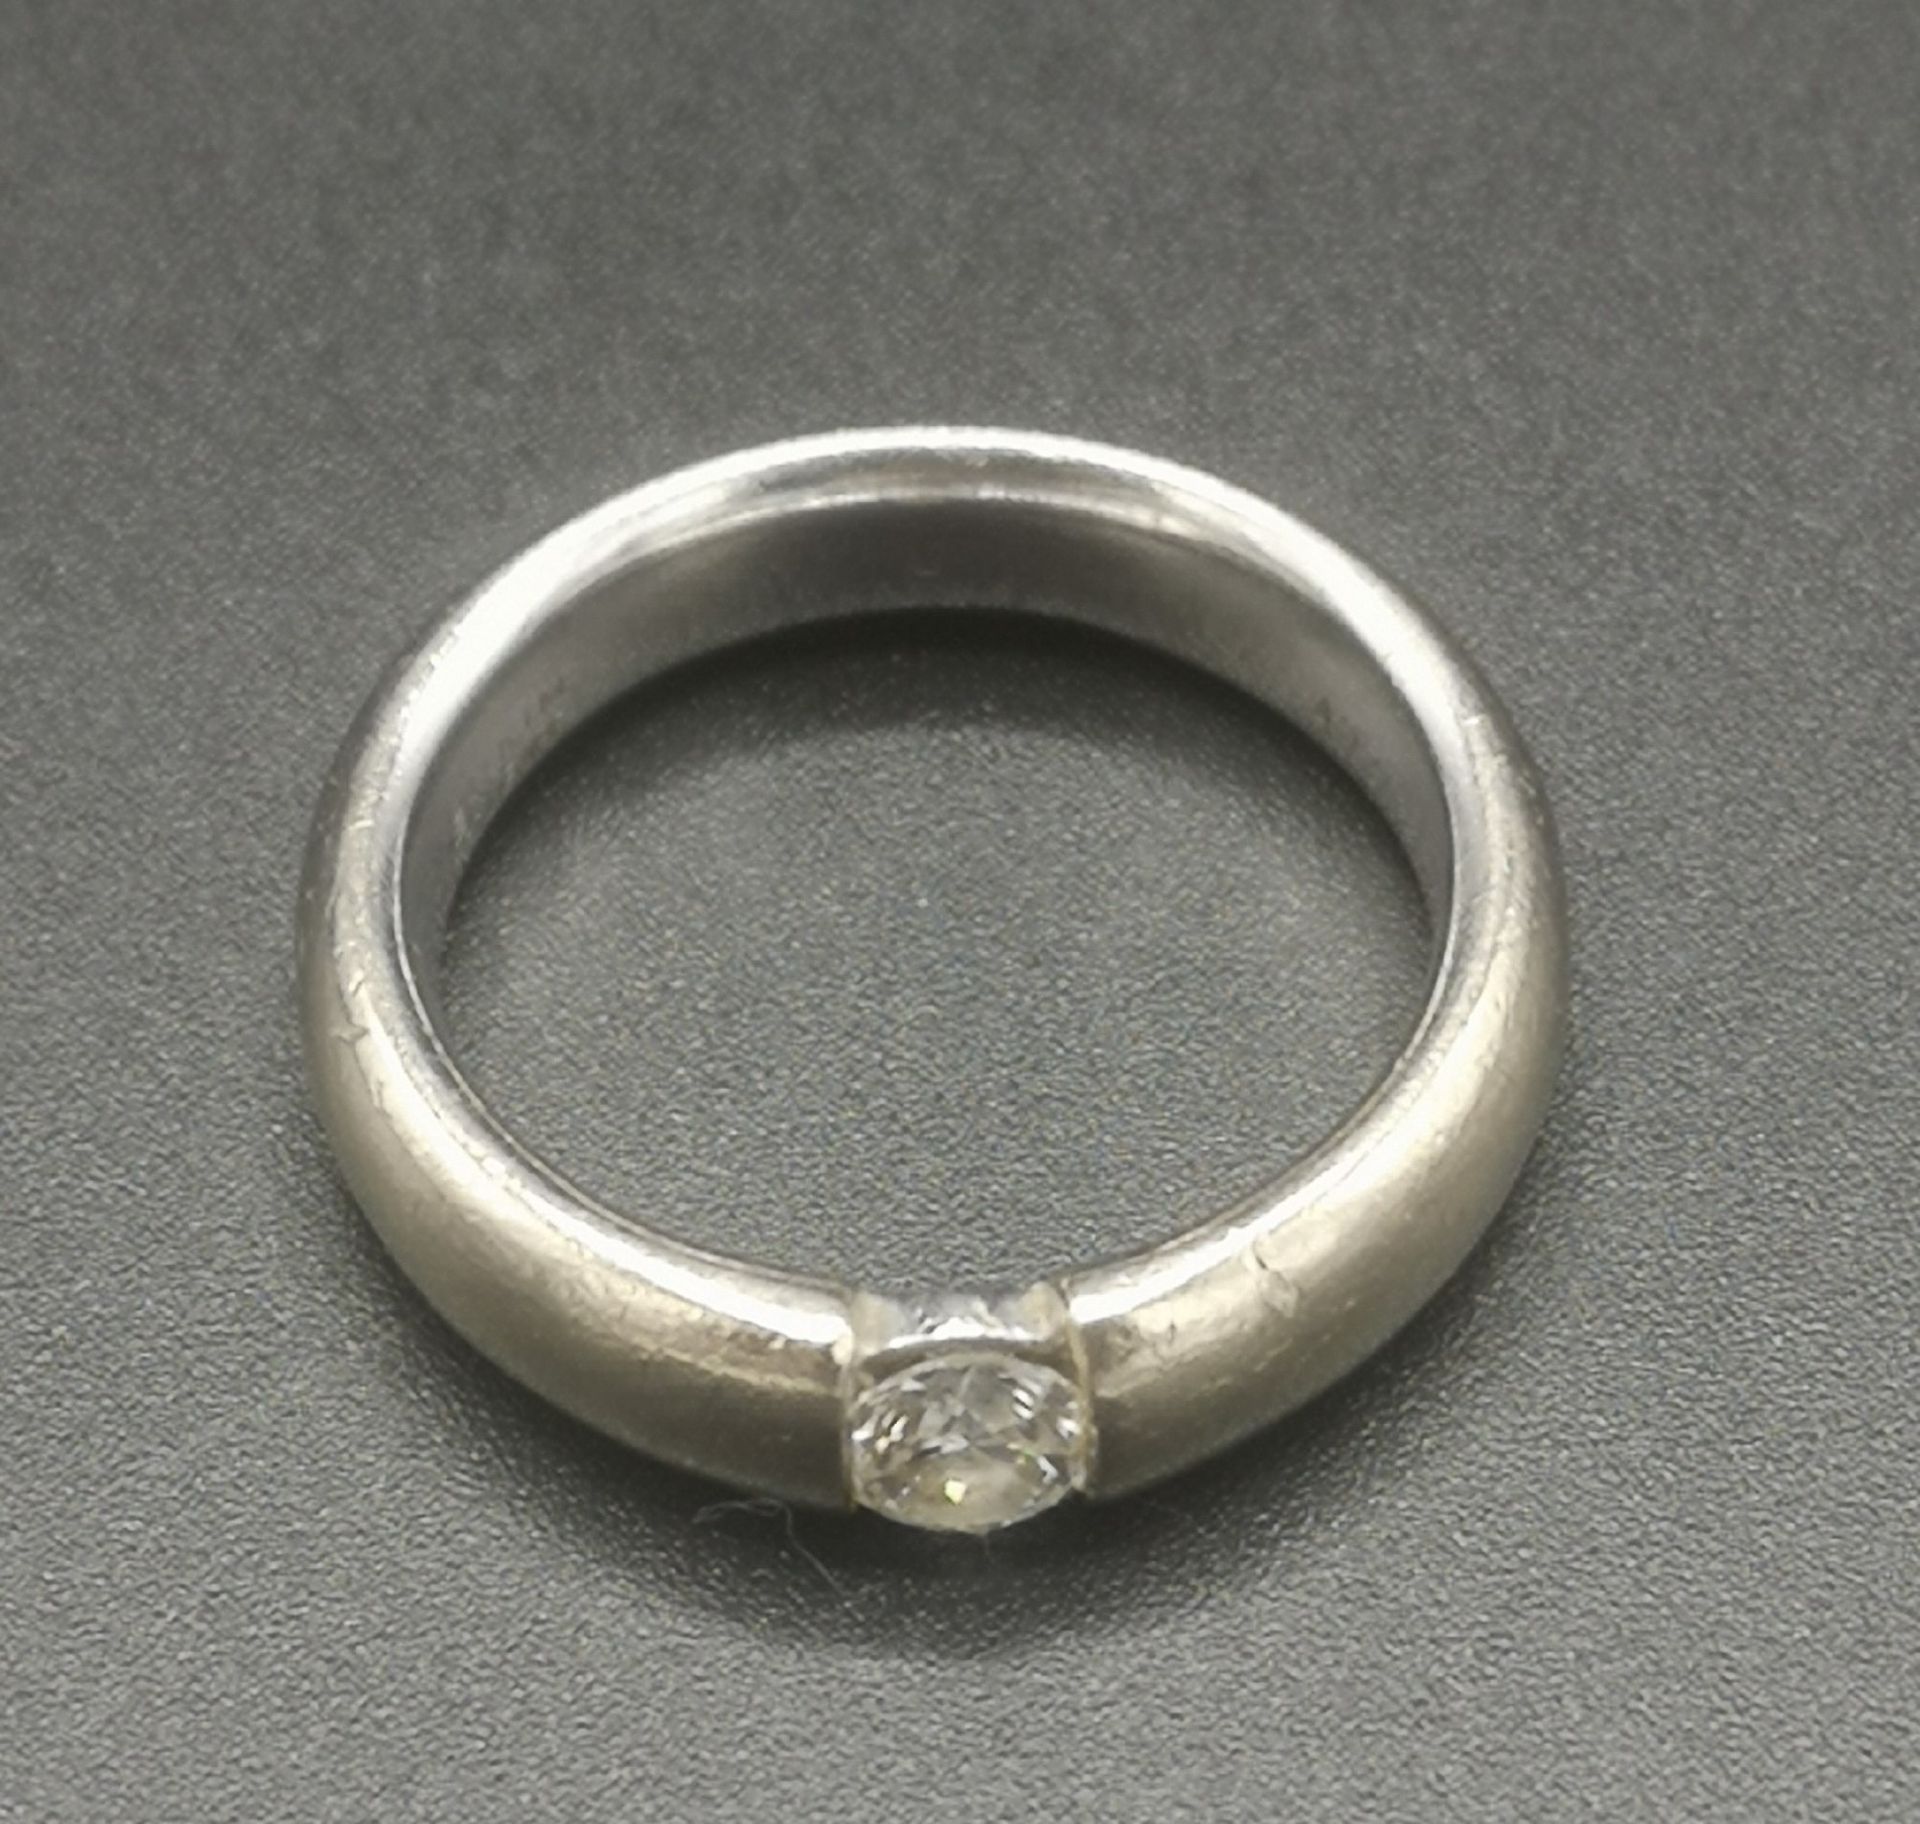 18ct white gold ring by Kim - Image 3 of 4